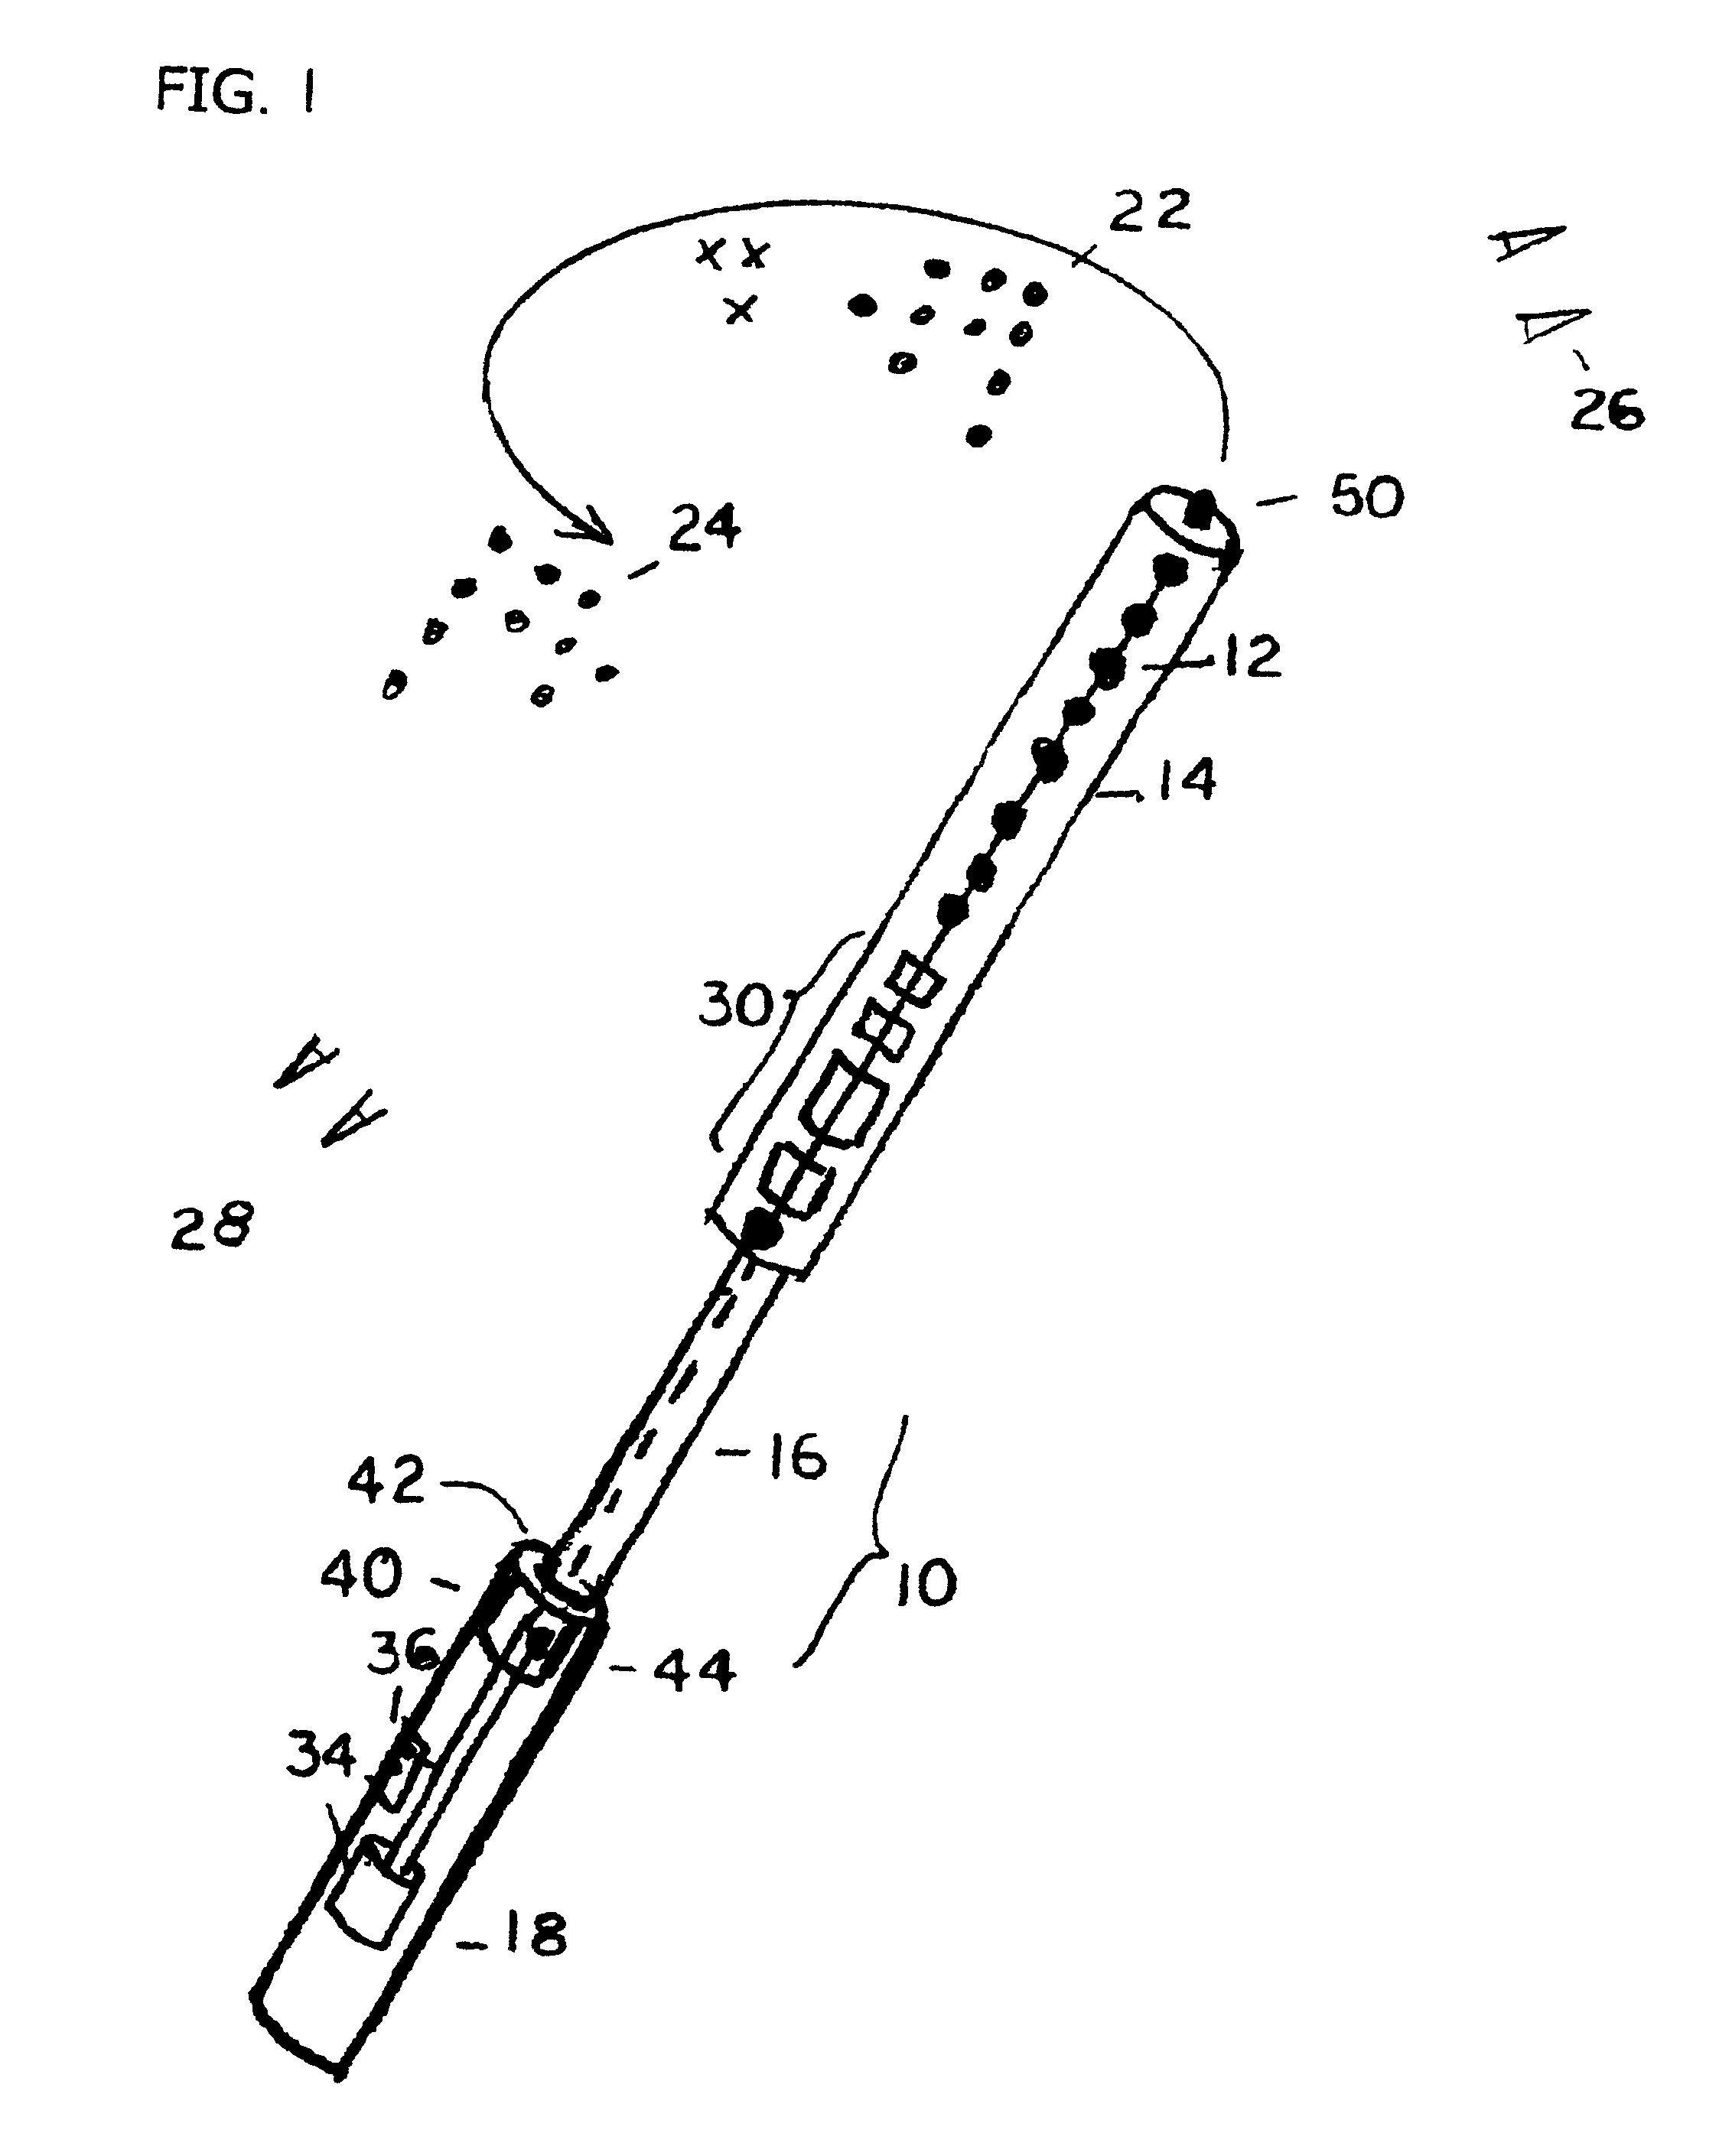 Visual special effects display device